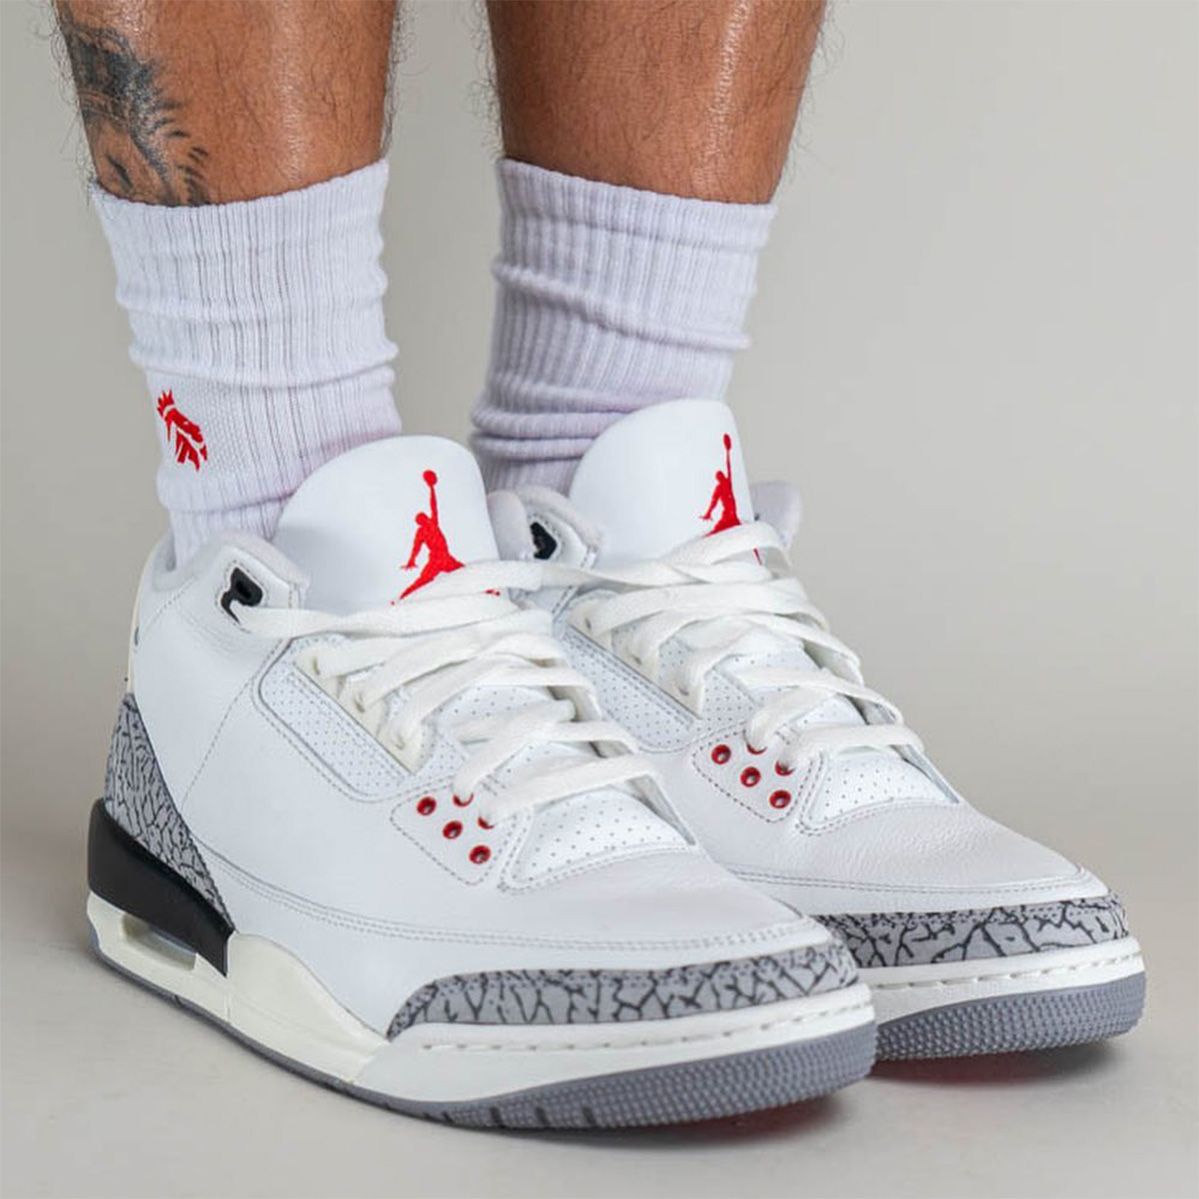 white cement 3 outfit